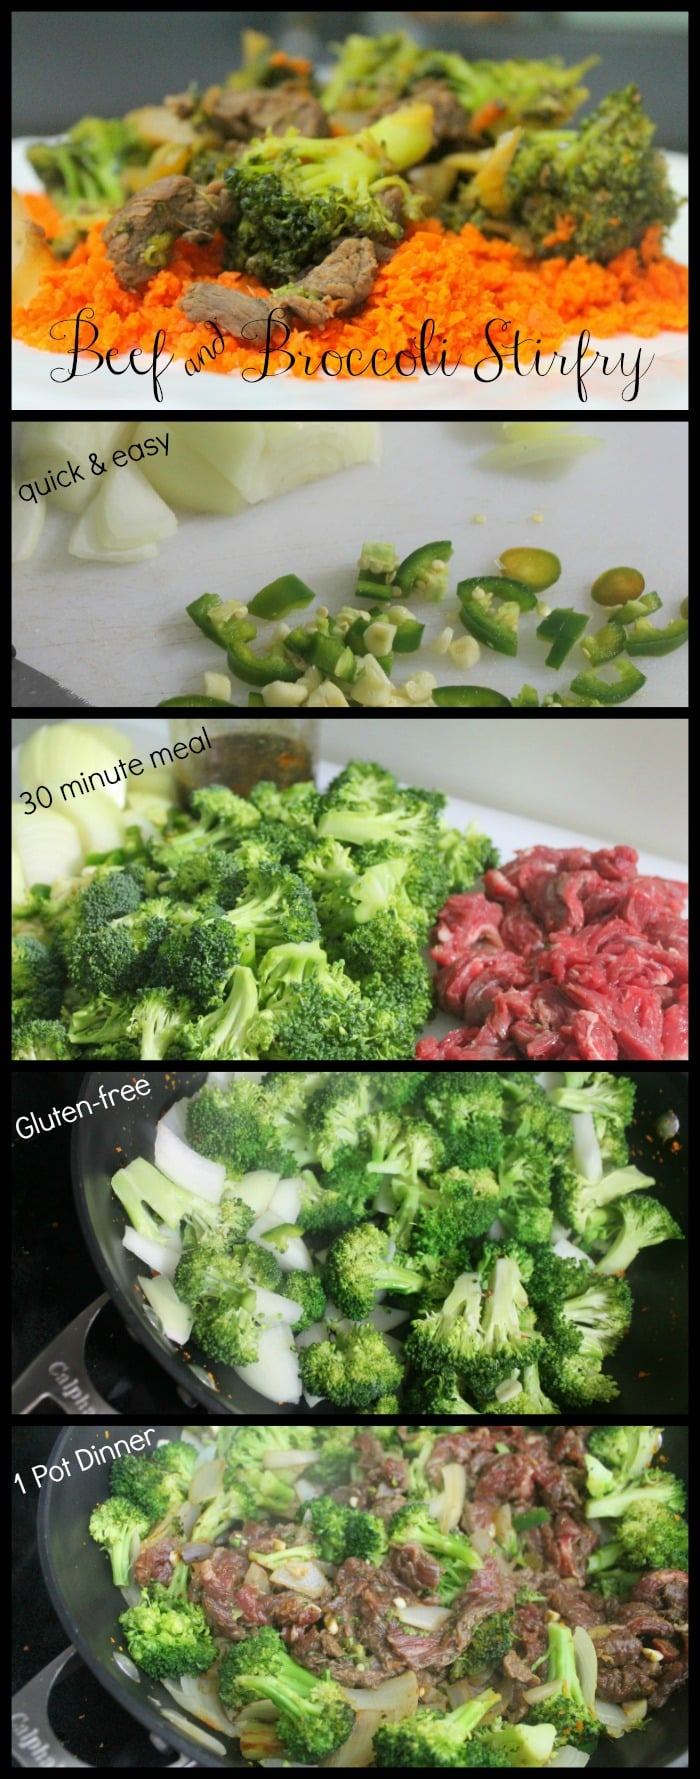 Quick Easy Meals: Beef and Broccoli Stirfry Recipe - www.realthekitchenandbeyond.com